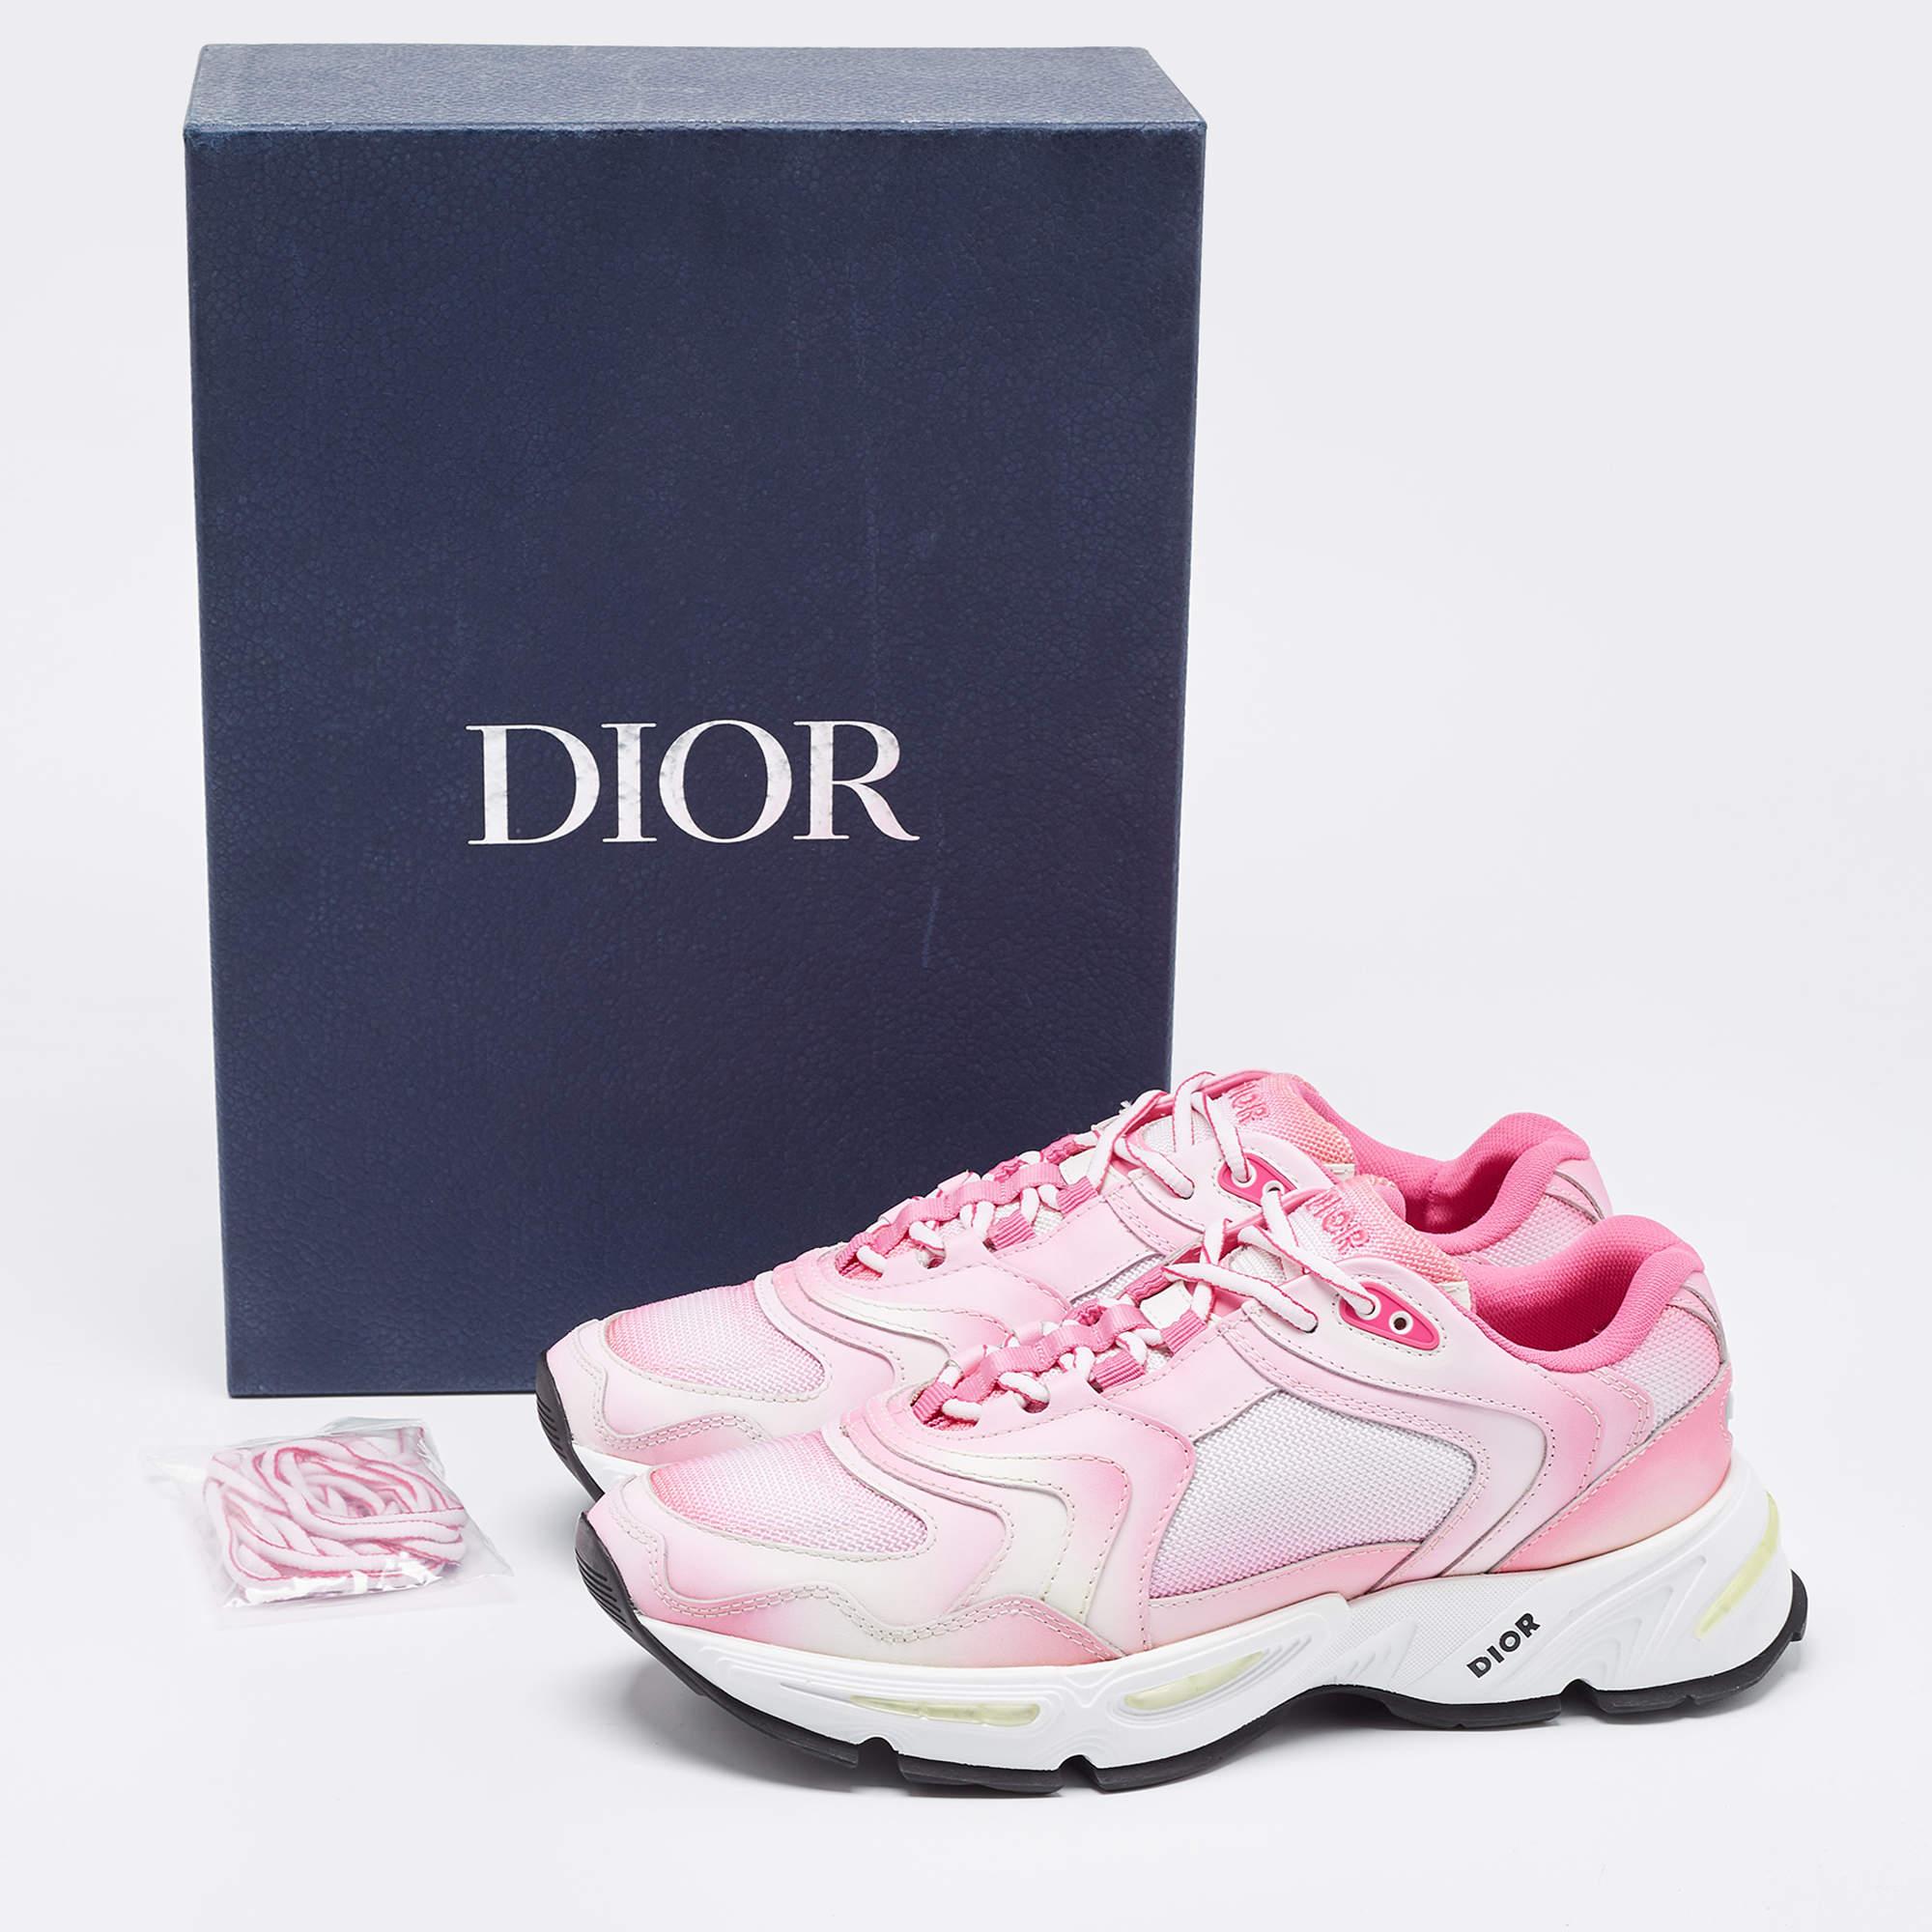 Dior Pink/White Mesh and Leather CD1 Gradient Sneakers Size 41 For Sale 4